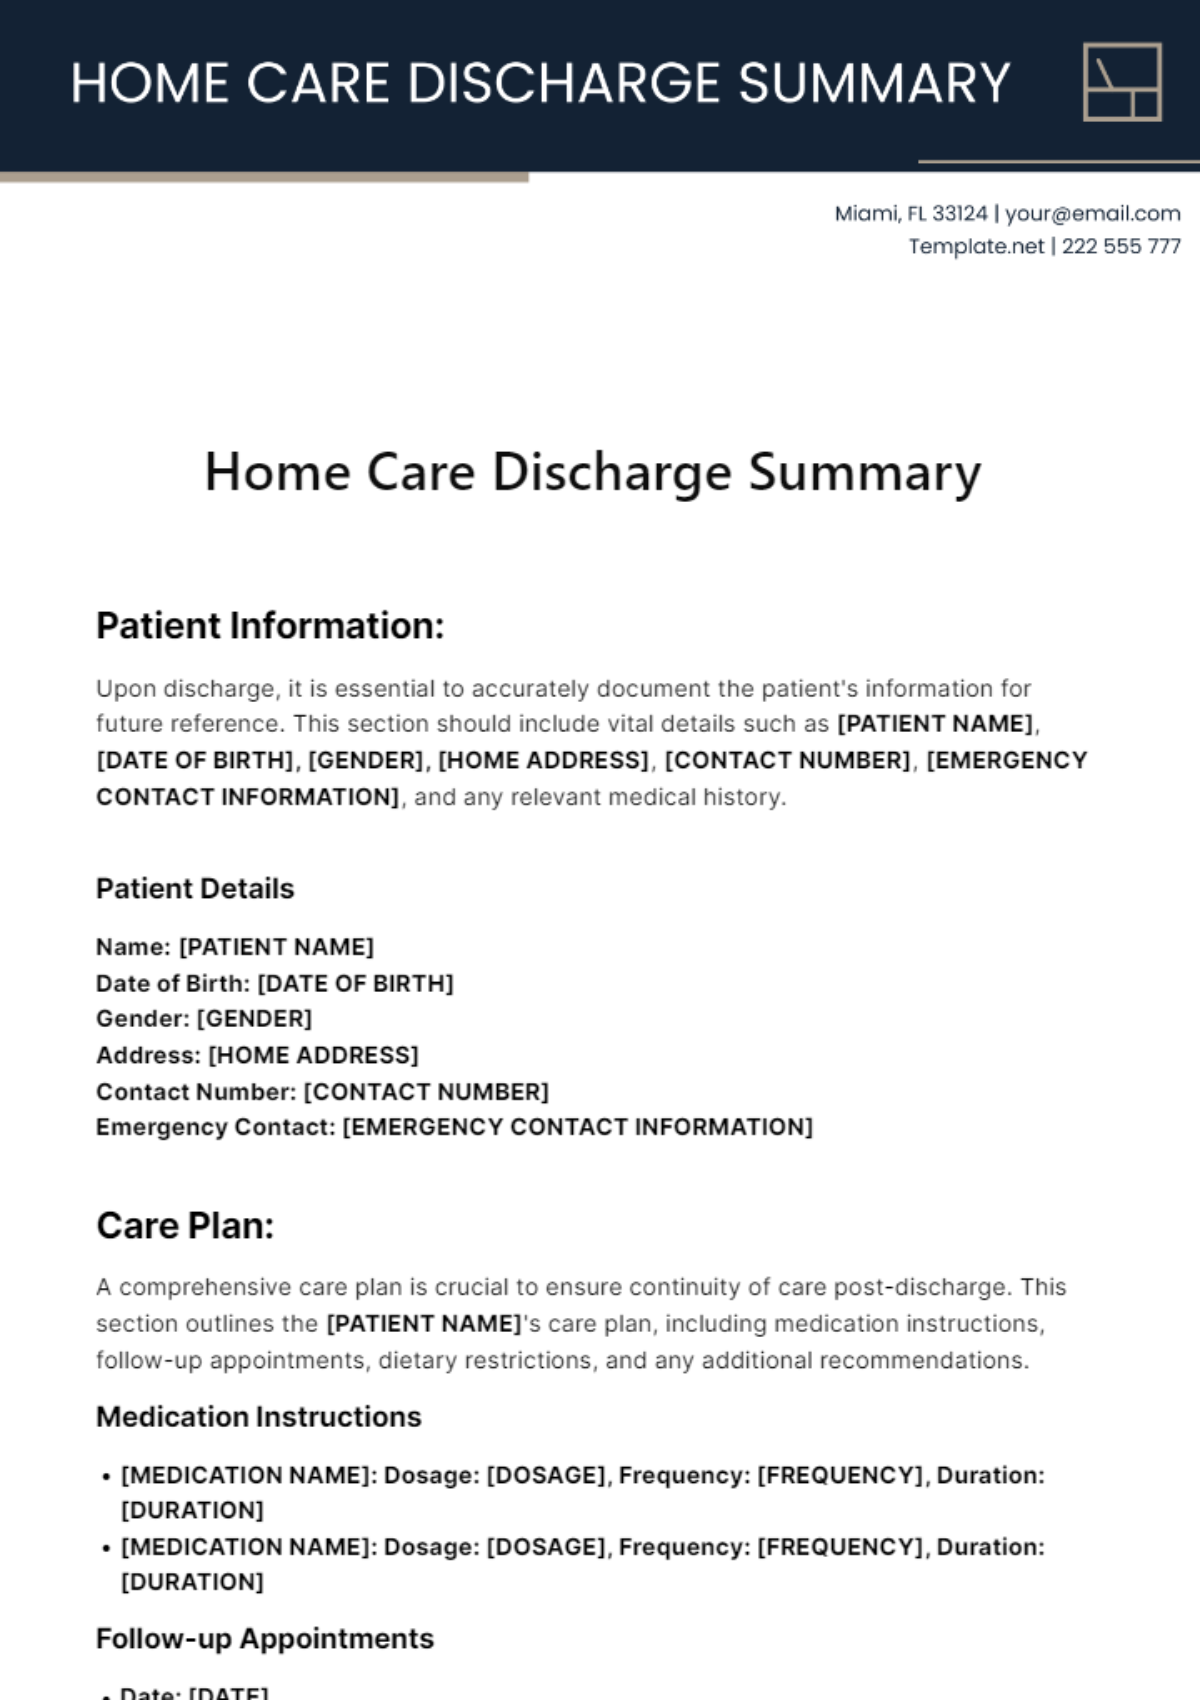 Home Care Discharge Summary Template